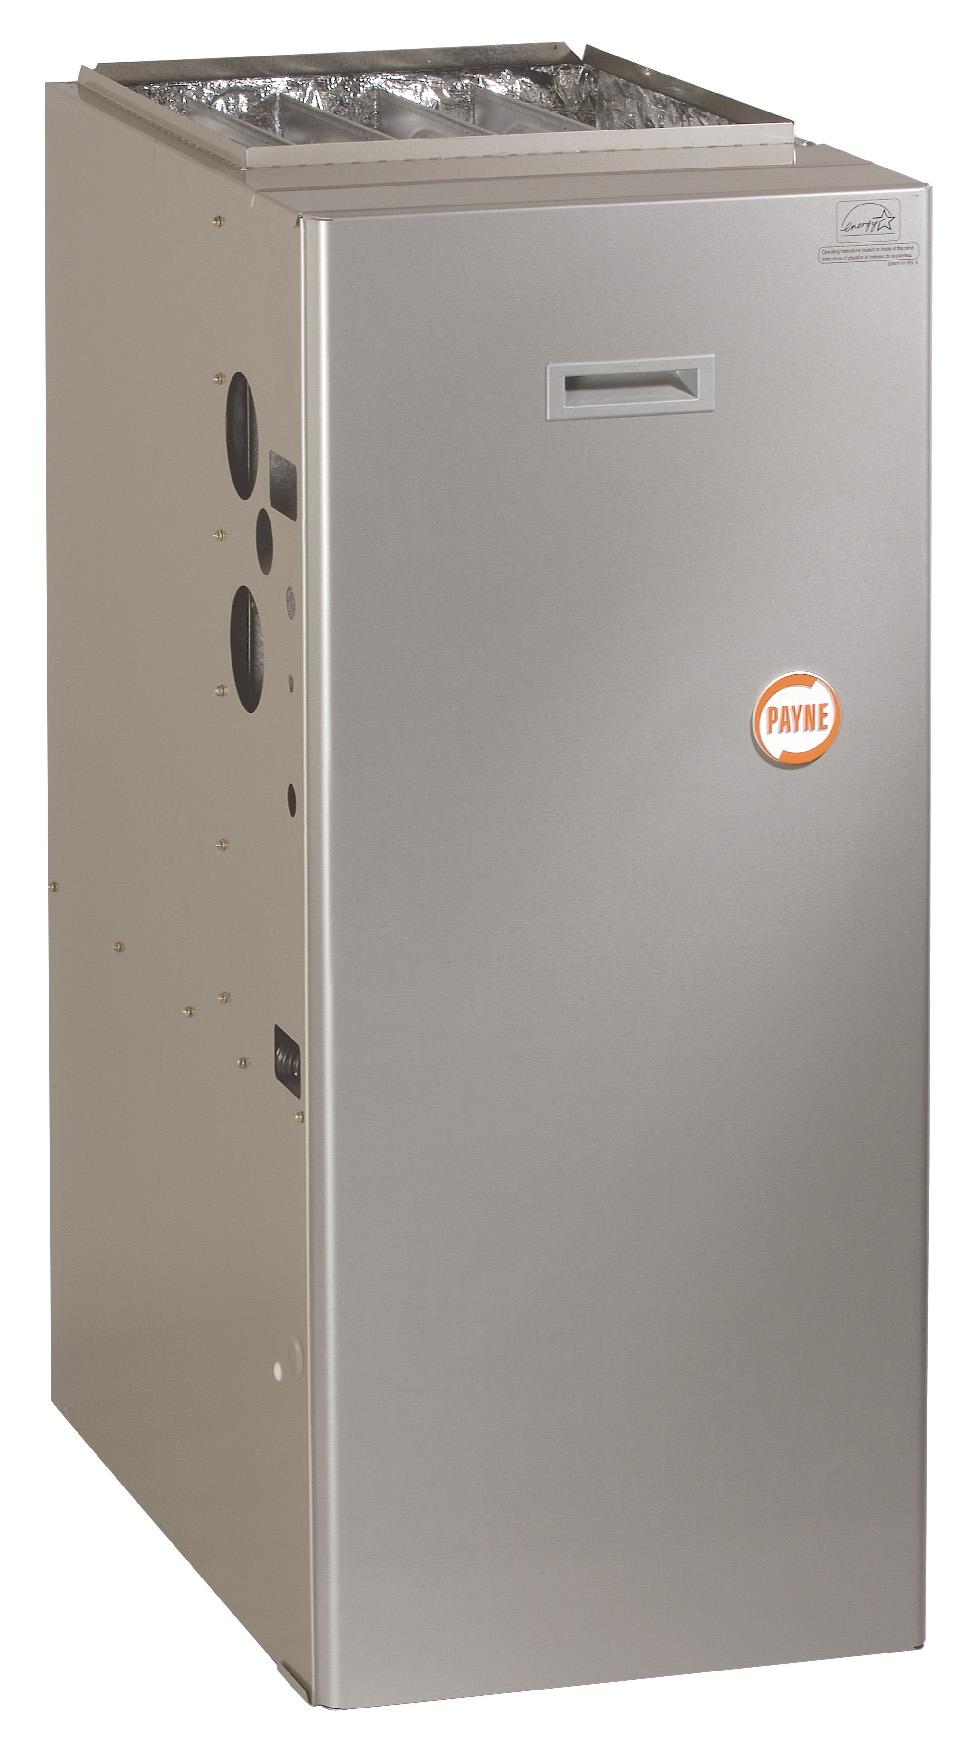 MULTIPOISE CONDENSING GAS Product Data INSTALLATION FLEXIBILITY The 4 -way multipoise design allows a model to be installed in an upflow, downflow, hizontal ientation.